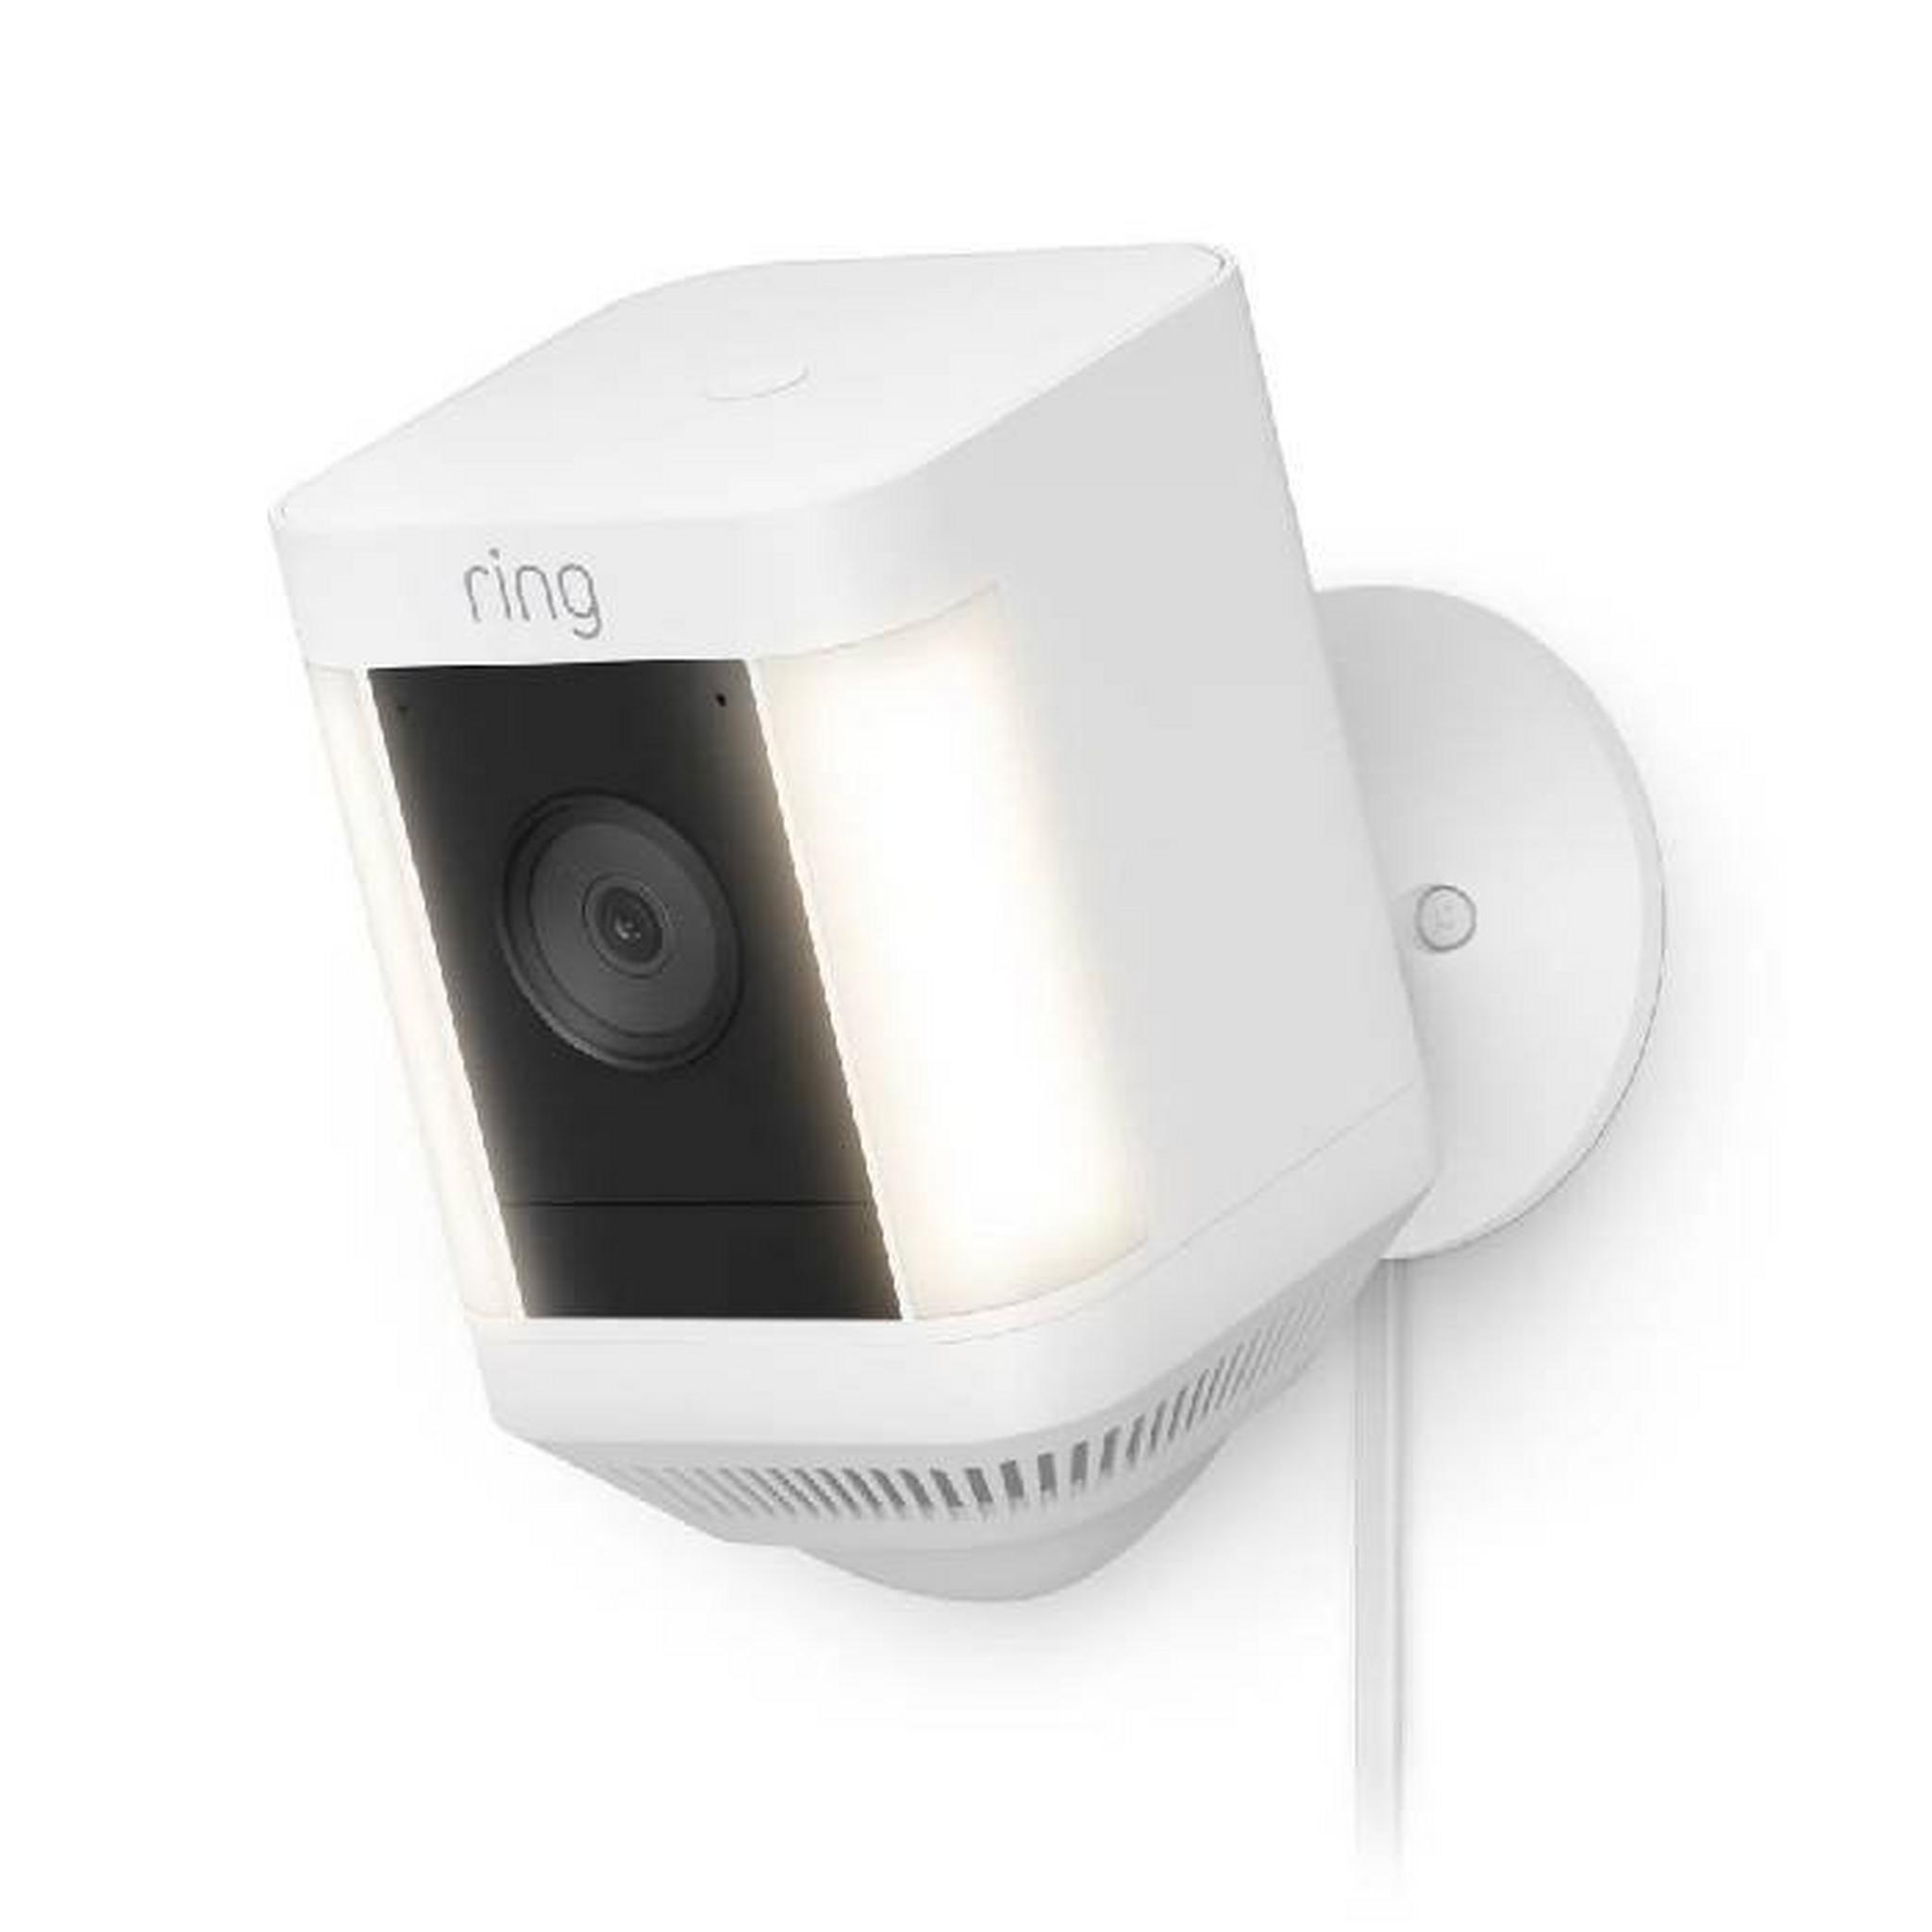 Ring Spotlight Cam Plus Plug In Security Camera, with Built -in Security Siren, +2 LED Spotlights, 8SH1S2-WME0 - White